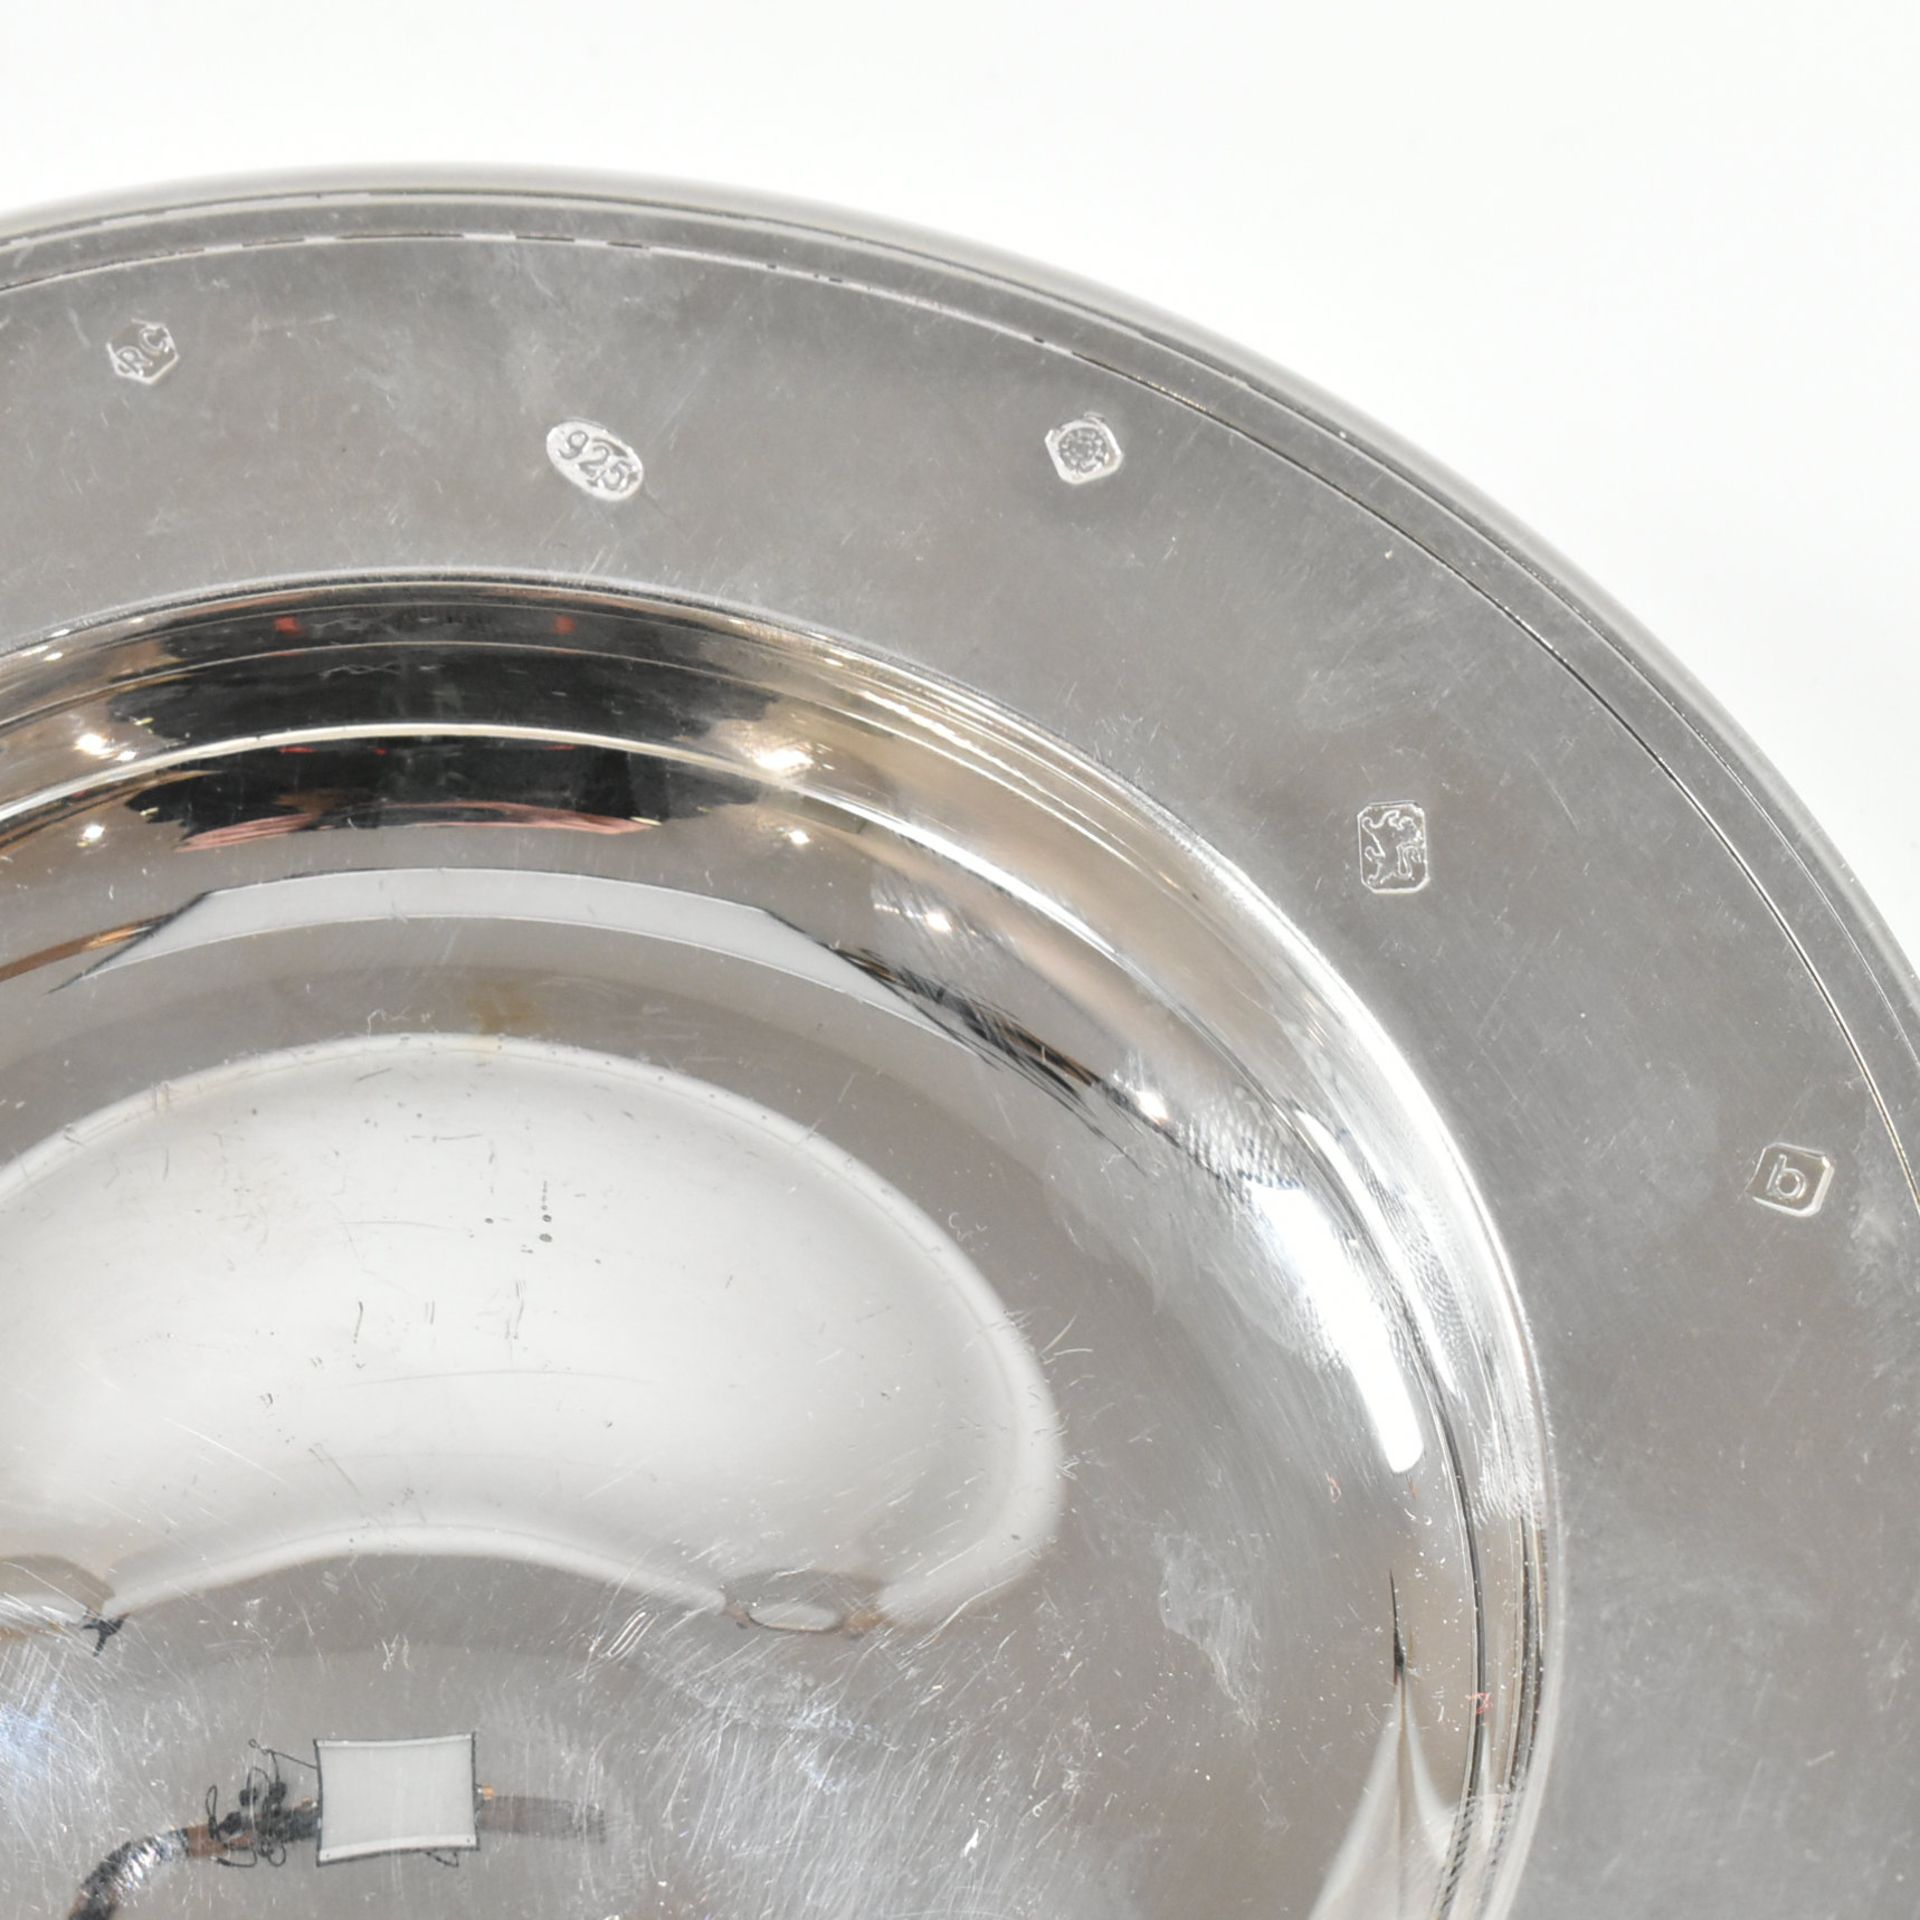 CARRS SHEFFIELD HALLMARKED SILVER COMMEMORATIVE DISH - Image 8 of 9